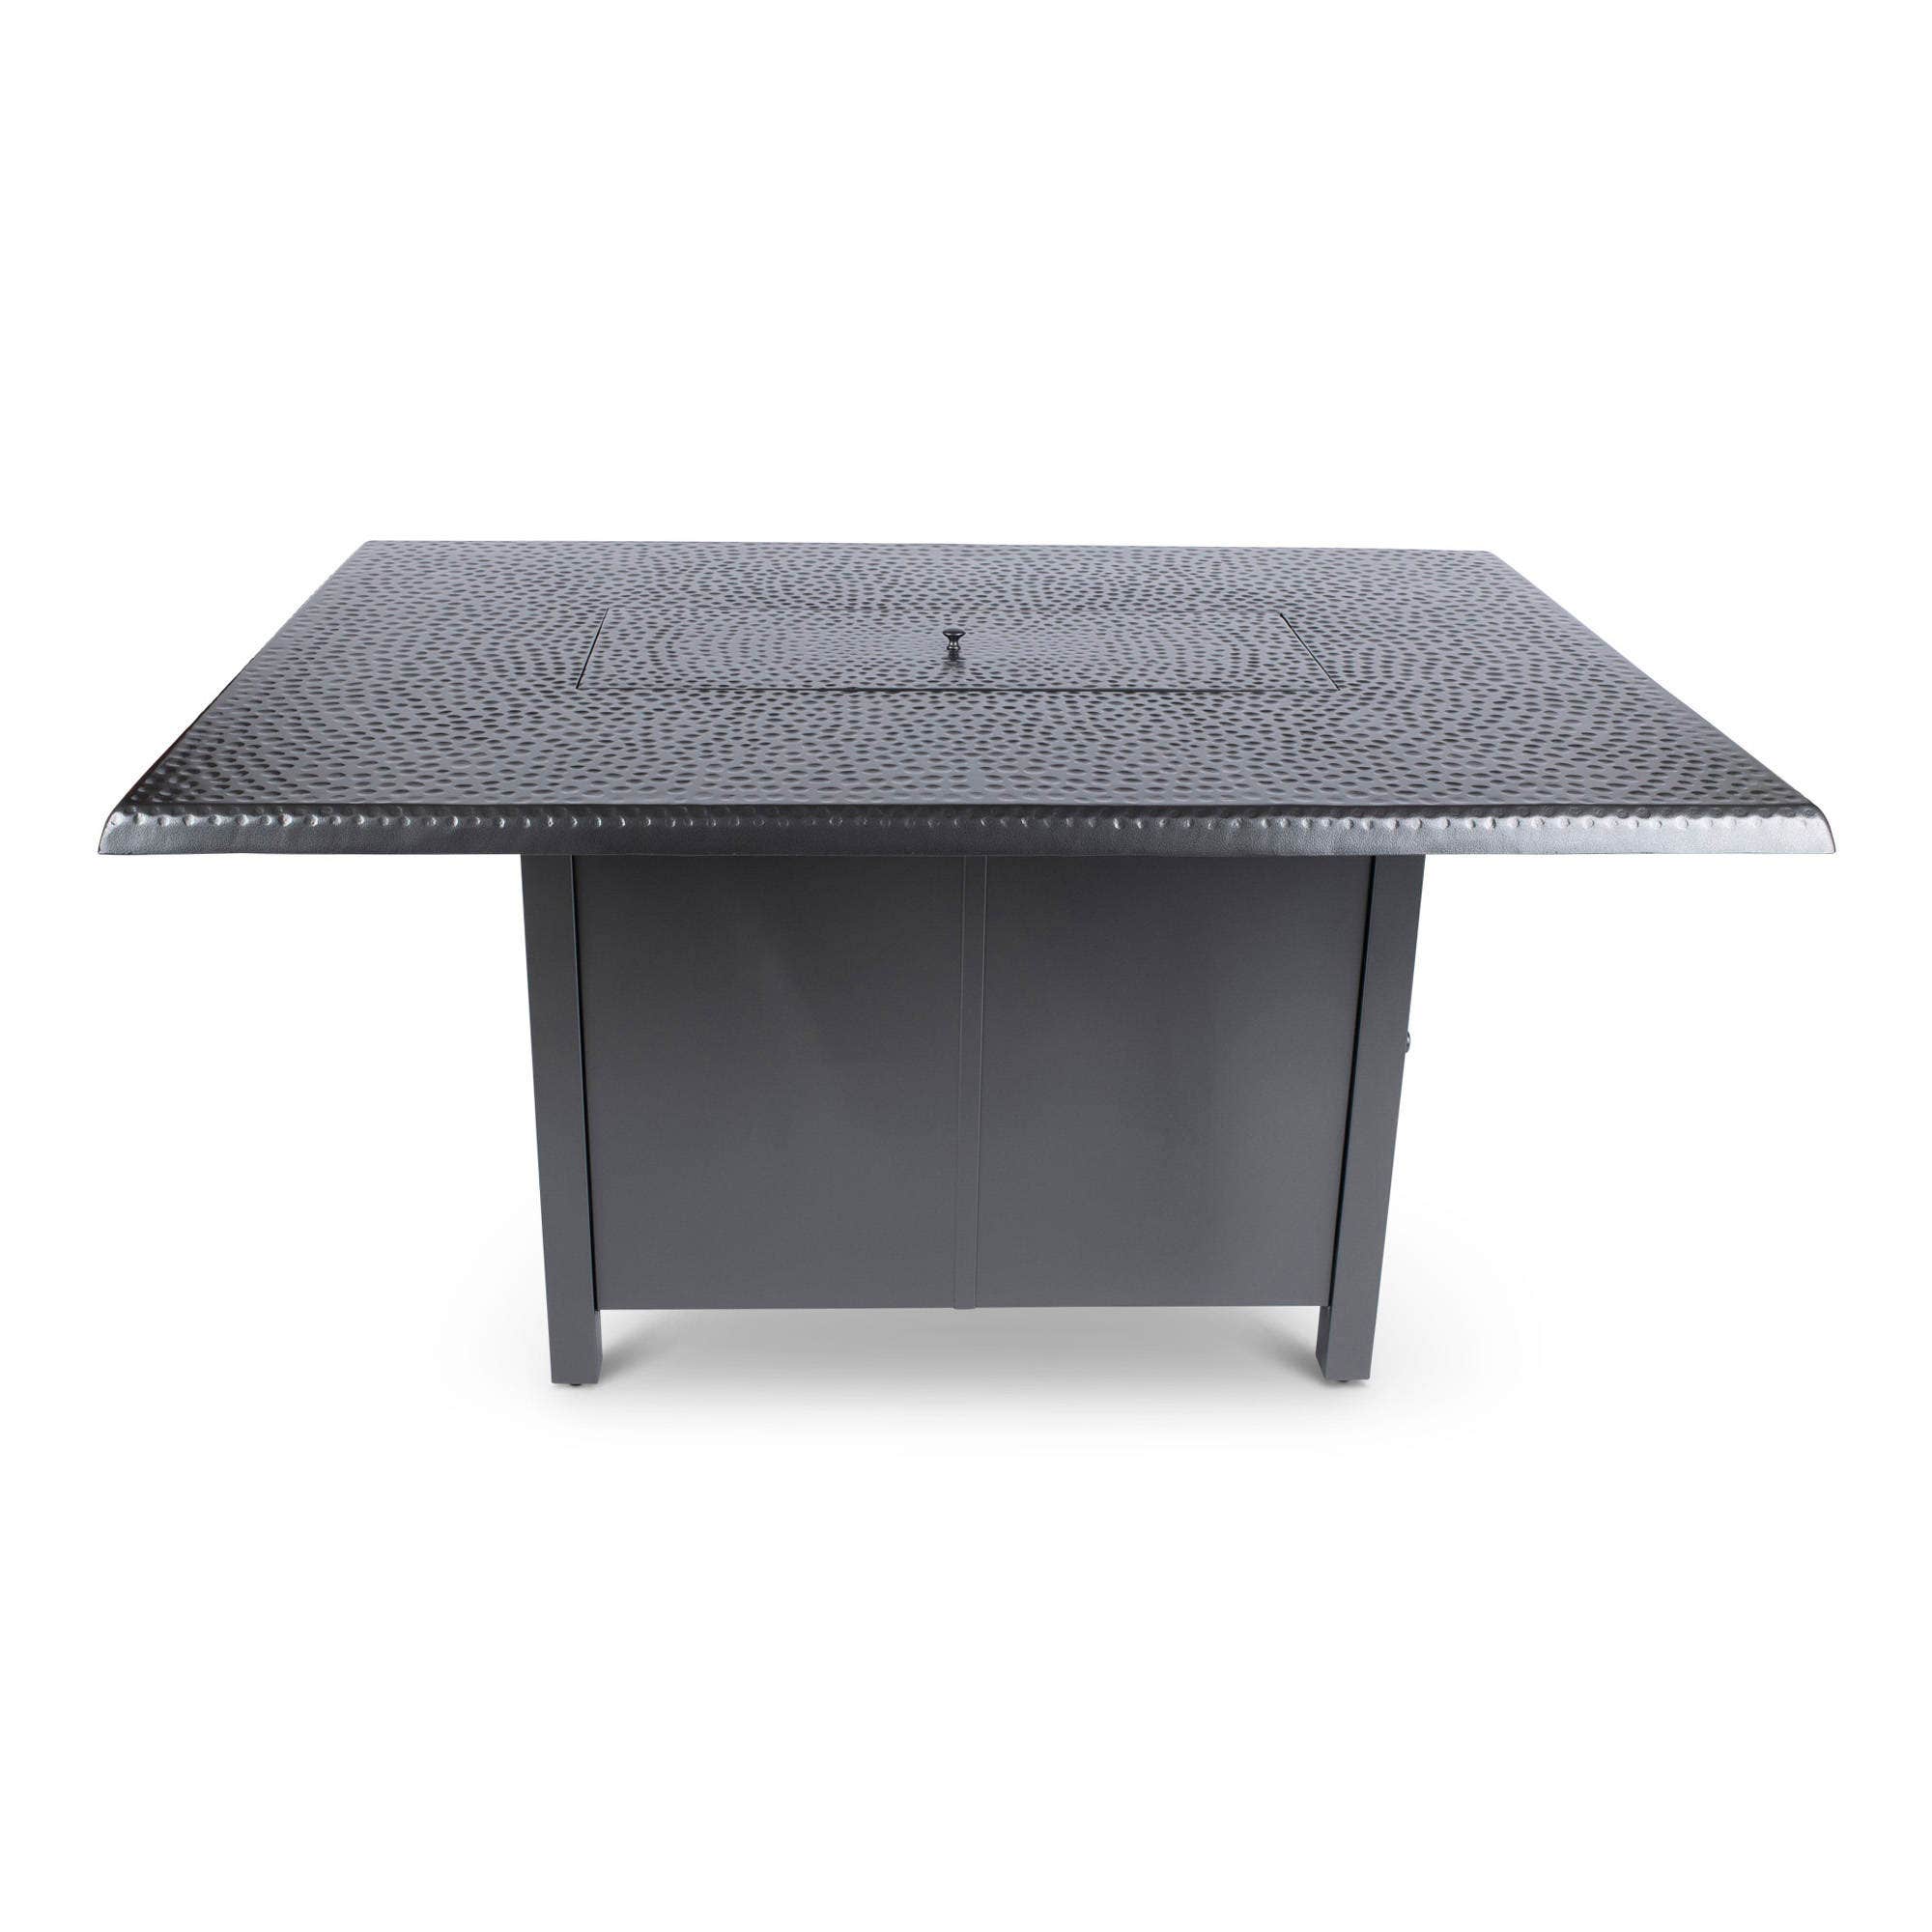 Woodard 42 inch x 60 inch Dining Height Fire Table with Hammered Top in Pewter Finish 12037577